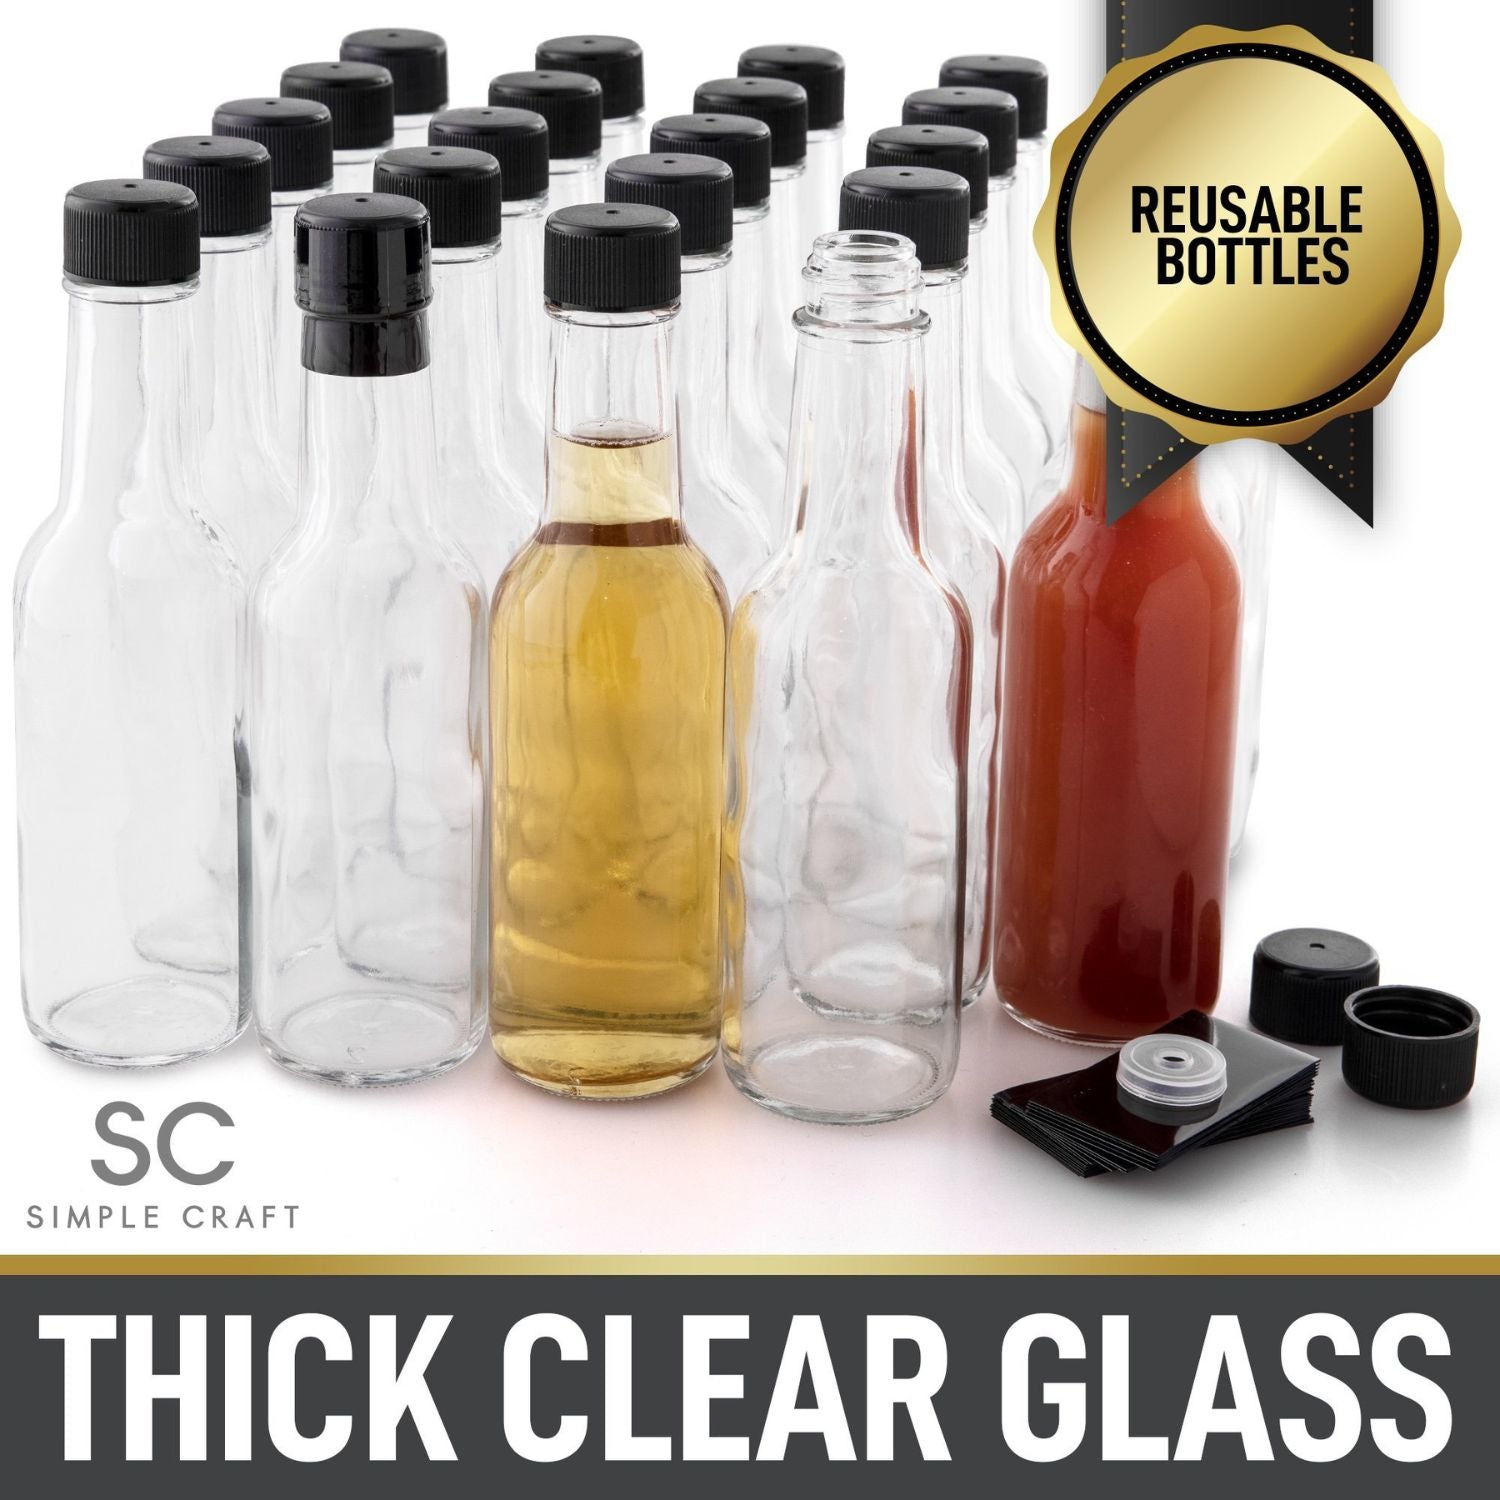 14-Pack Glass Hot Sauce Bottles with Caps, Glass Sauce Bottles